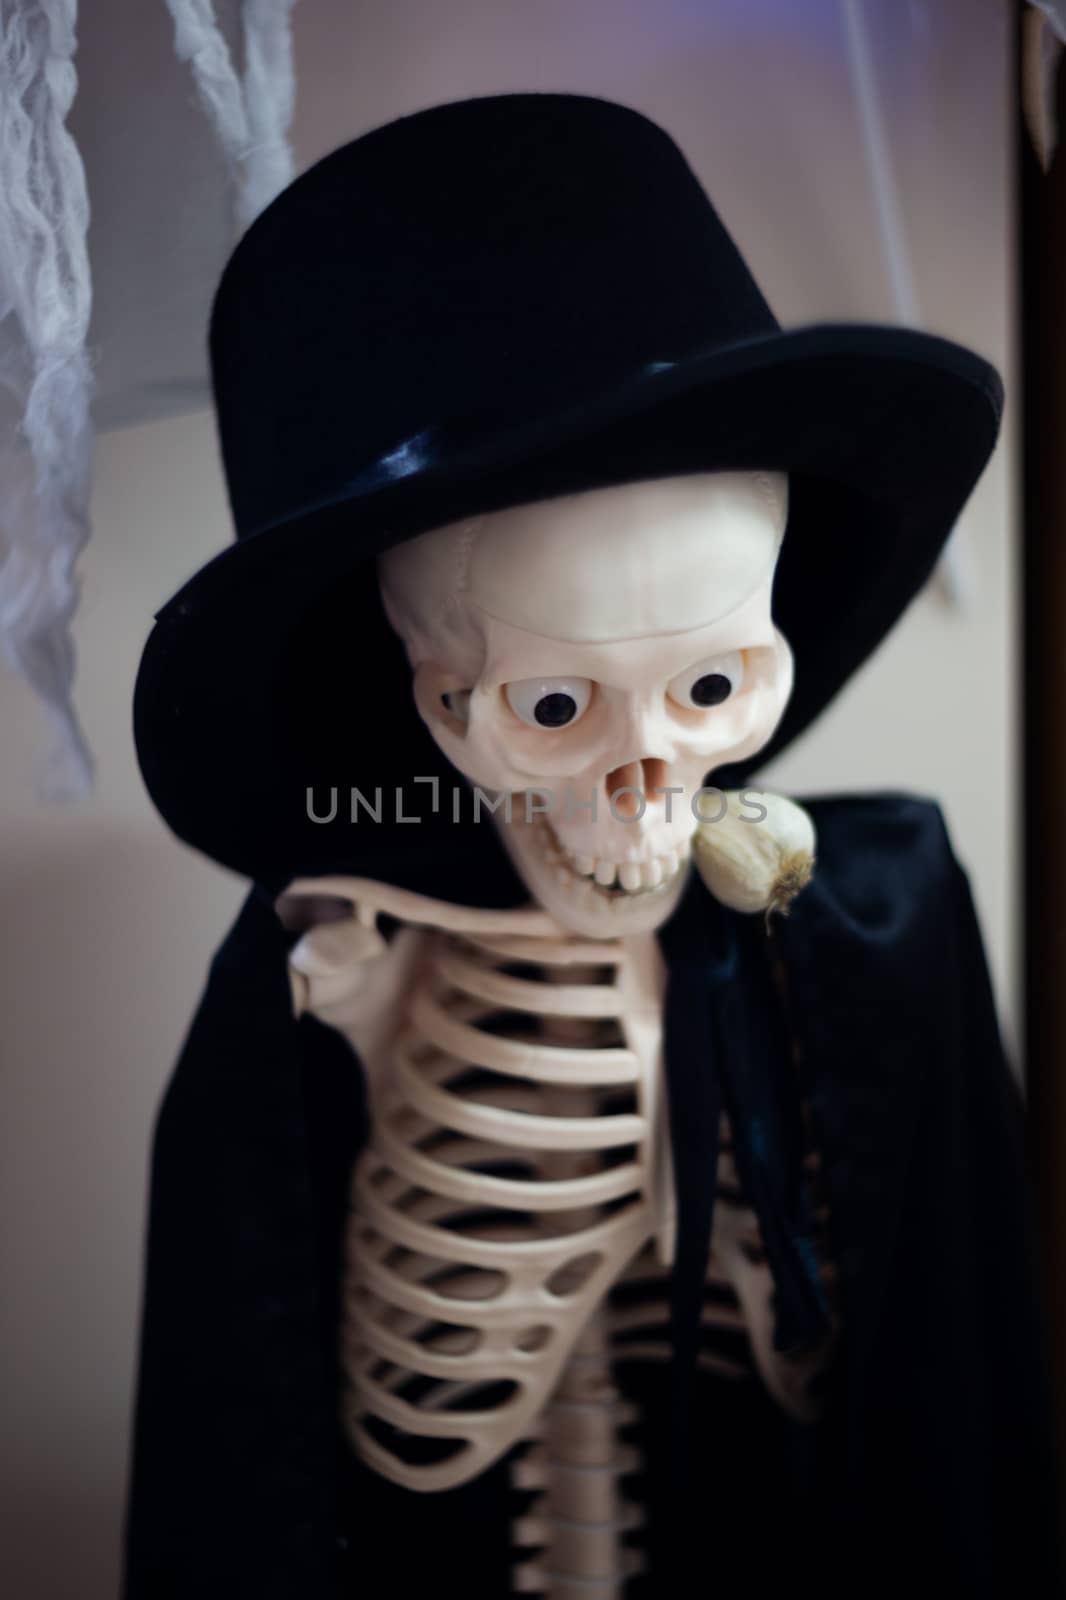 Skeleton with hat on head and cloak with garlic in mouth. Halloween decoration. Close-up view with blurred background.